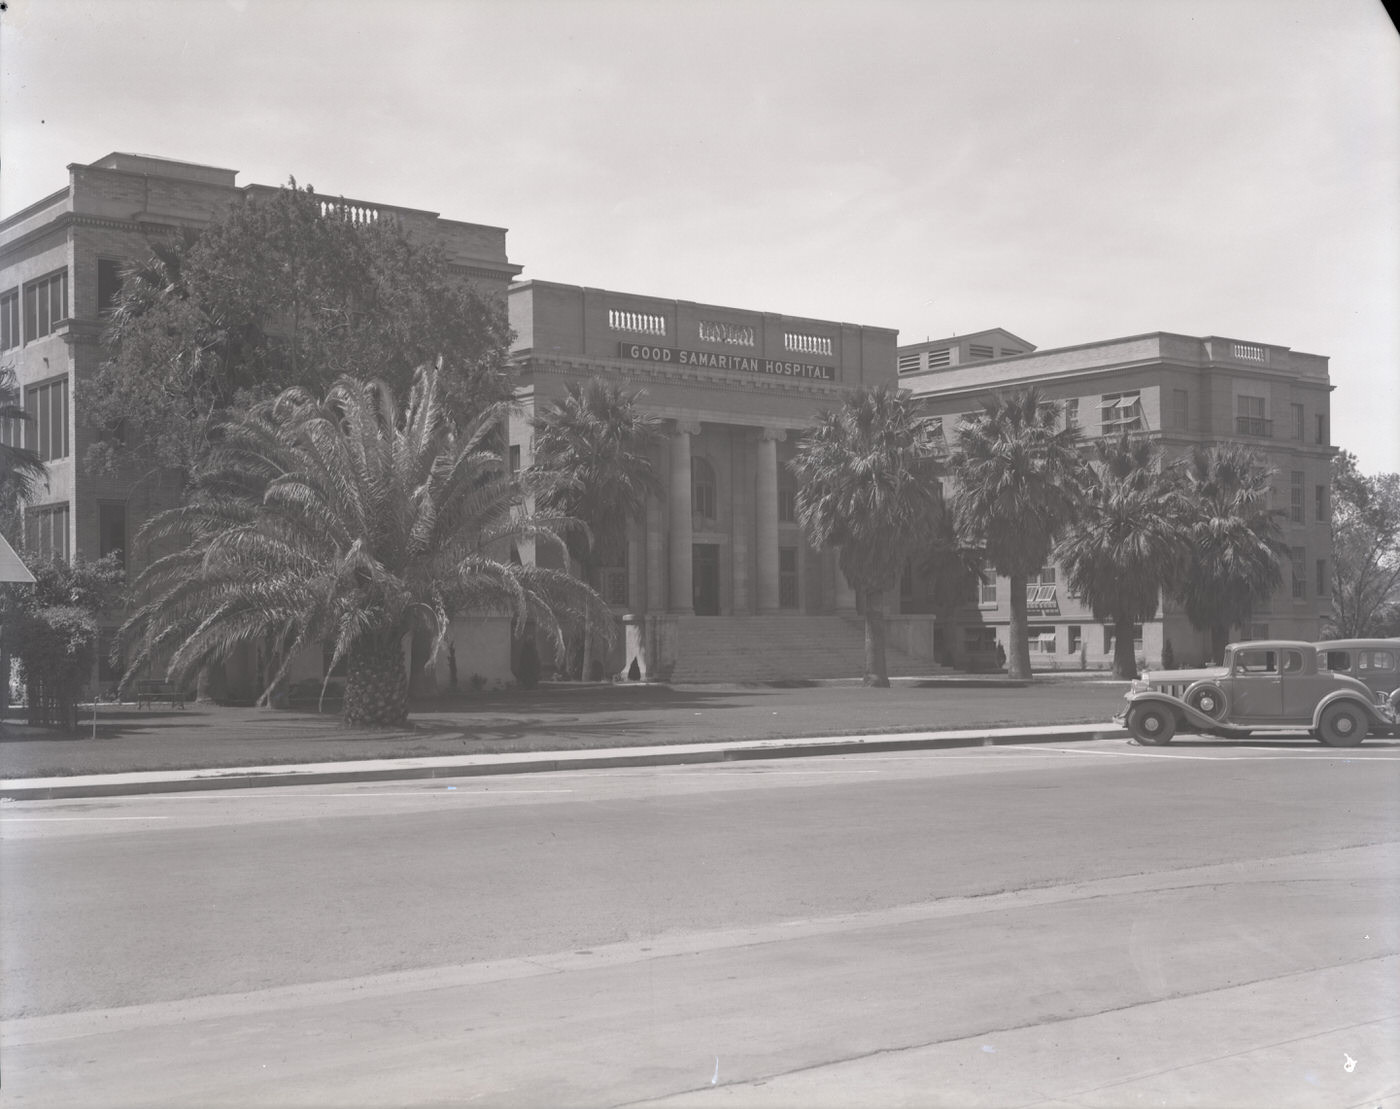 Good Samaritan Hospital Building Exterior, 1930s. This building was located on 10th St. and McDowell Rd. in Phoenix.